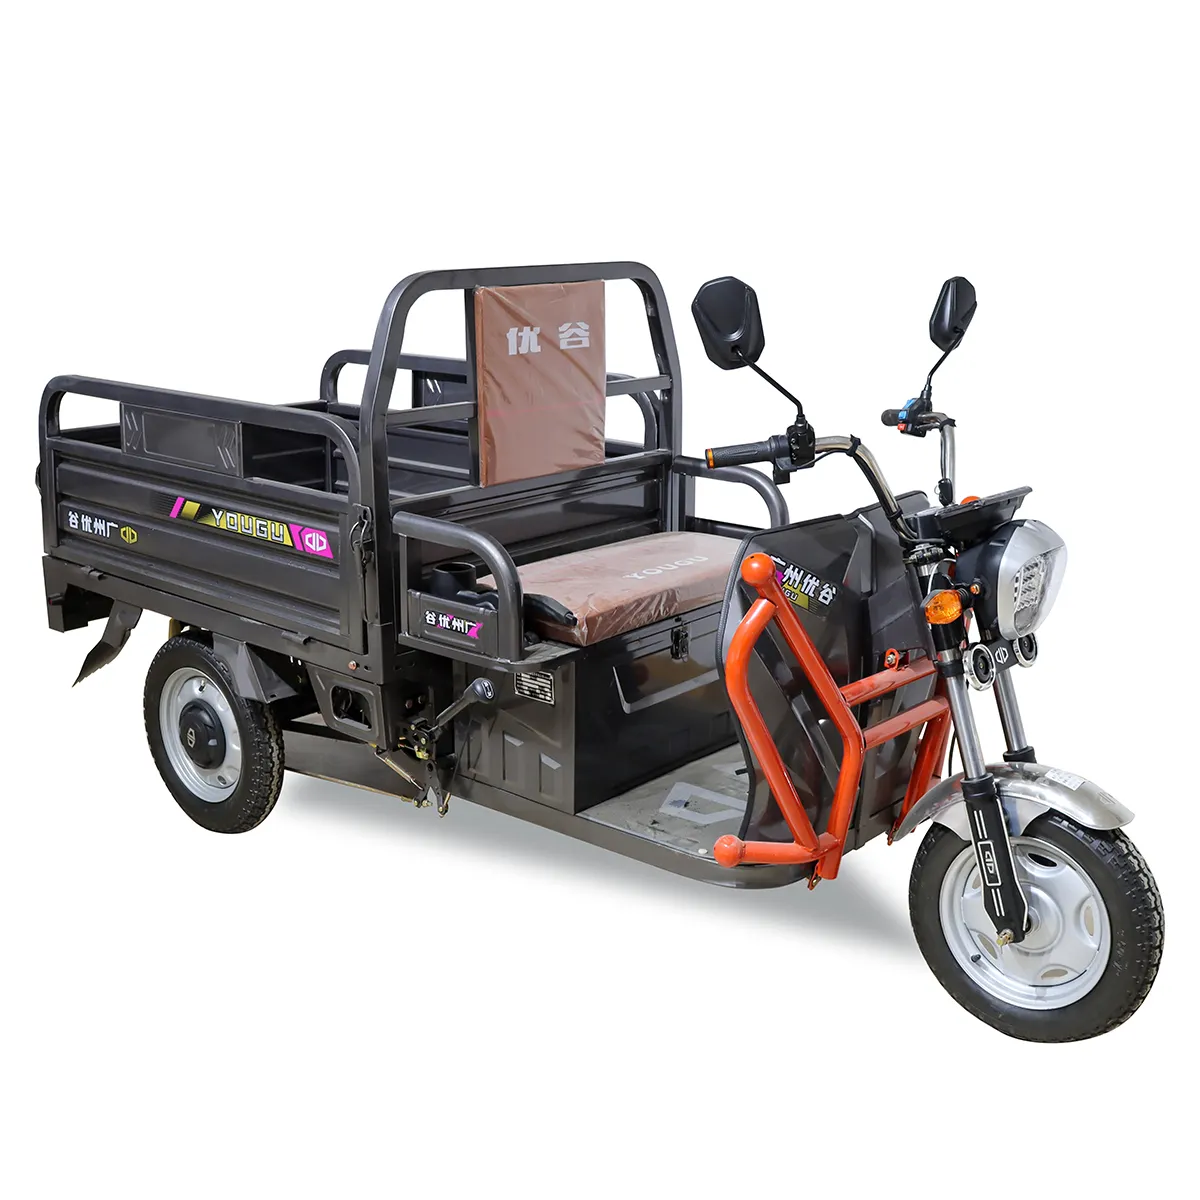 LUBEI Vehicle Manufacturer 800W/1000W 60V 3 Wheel Electrical Tricycle Motorcycle Cargo Tricycle